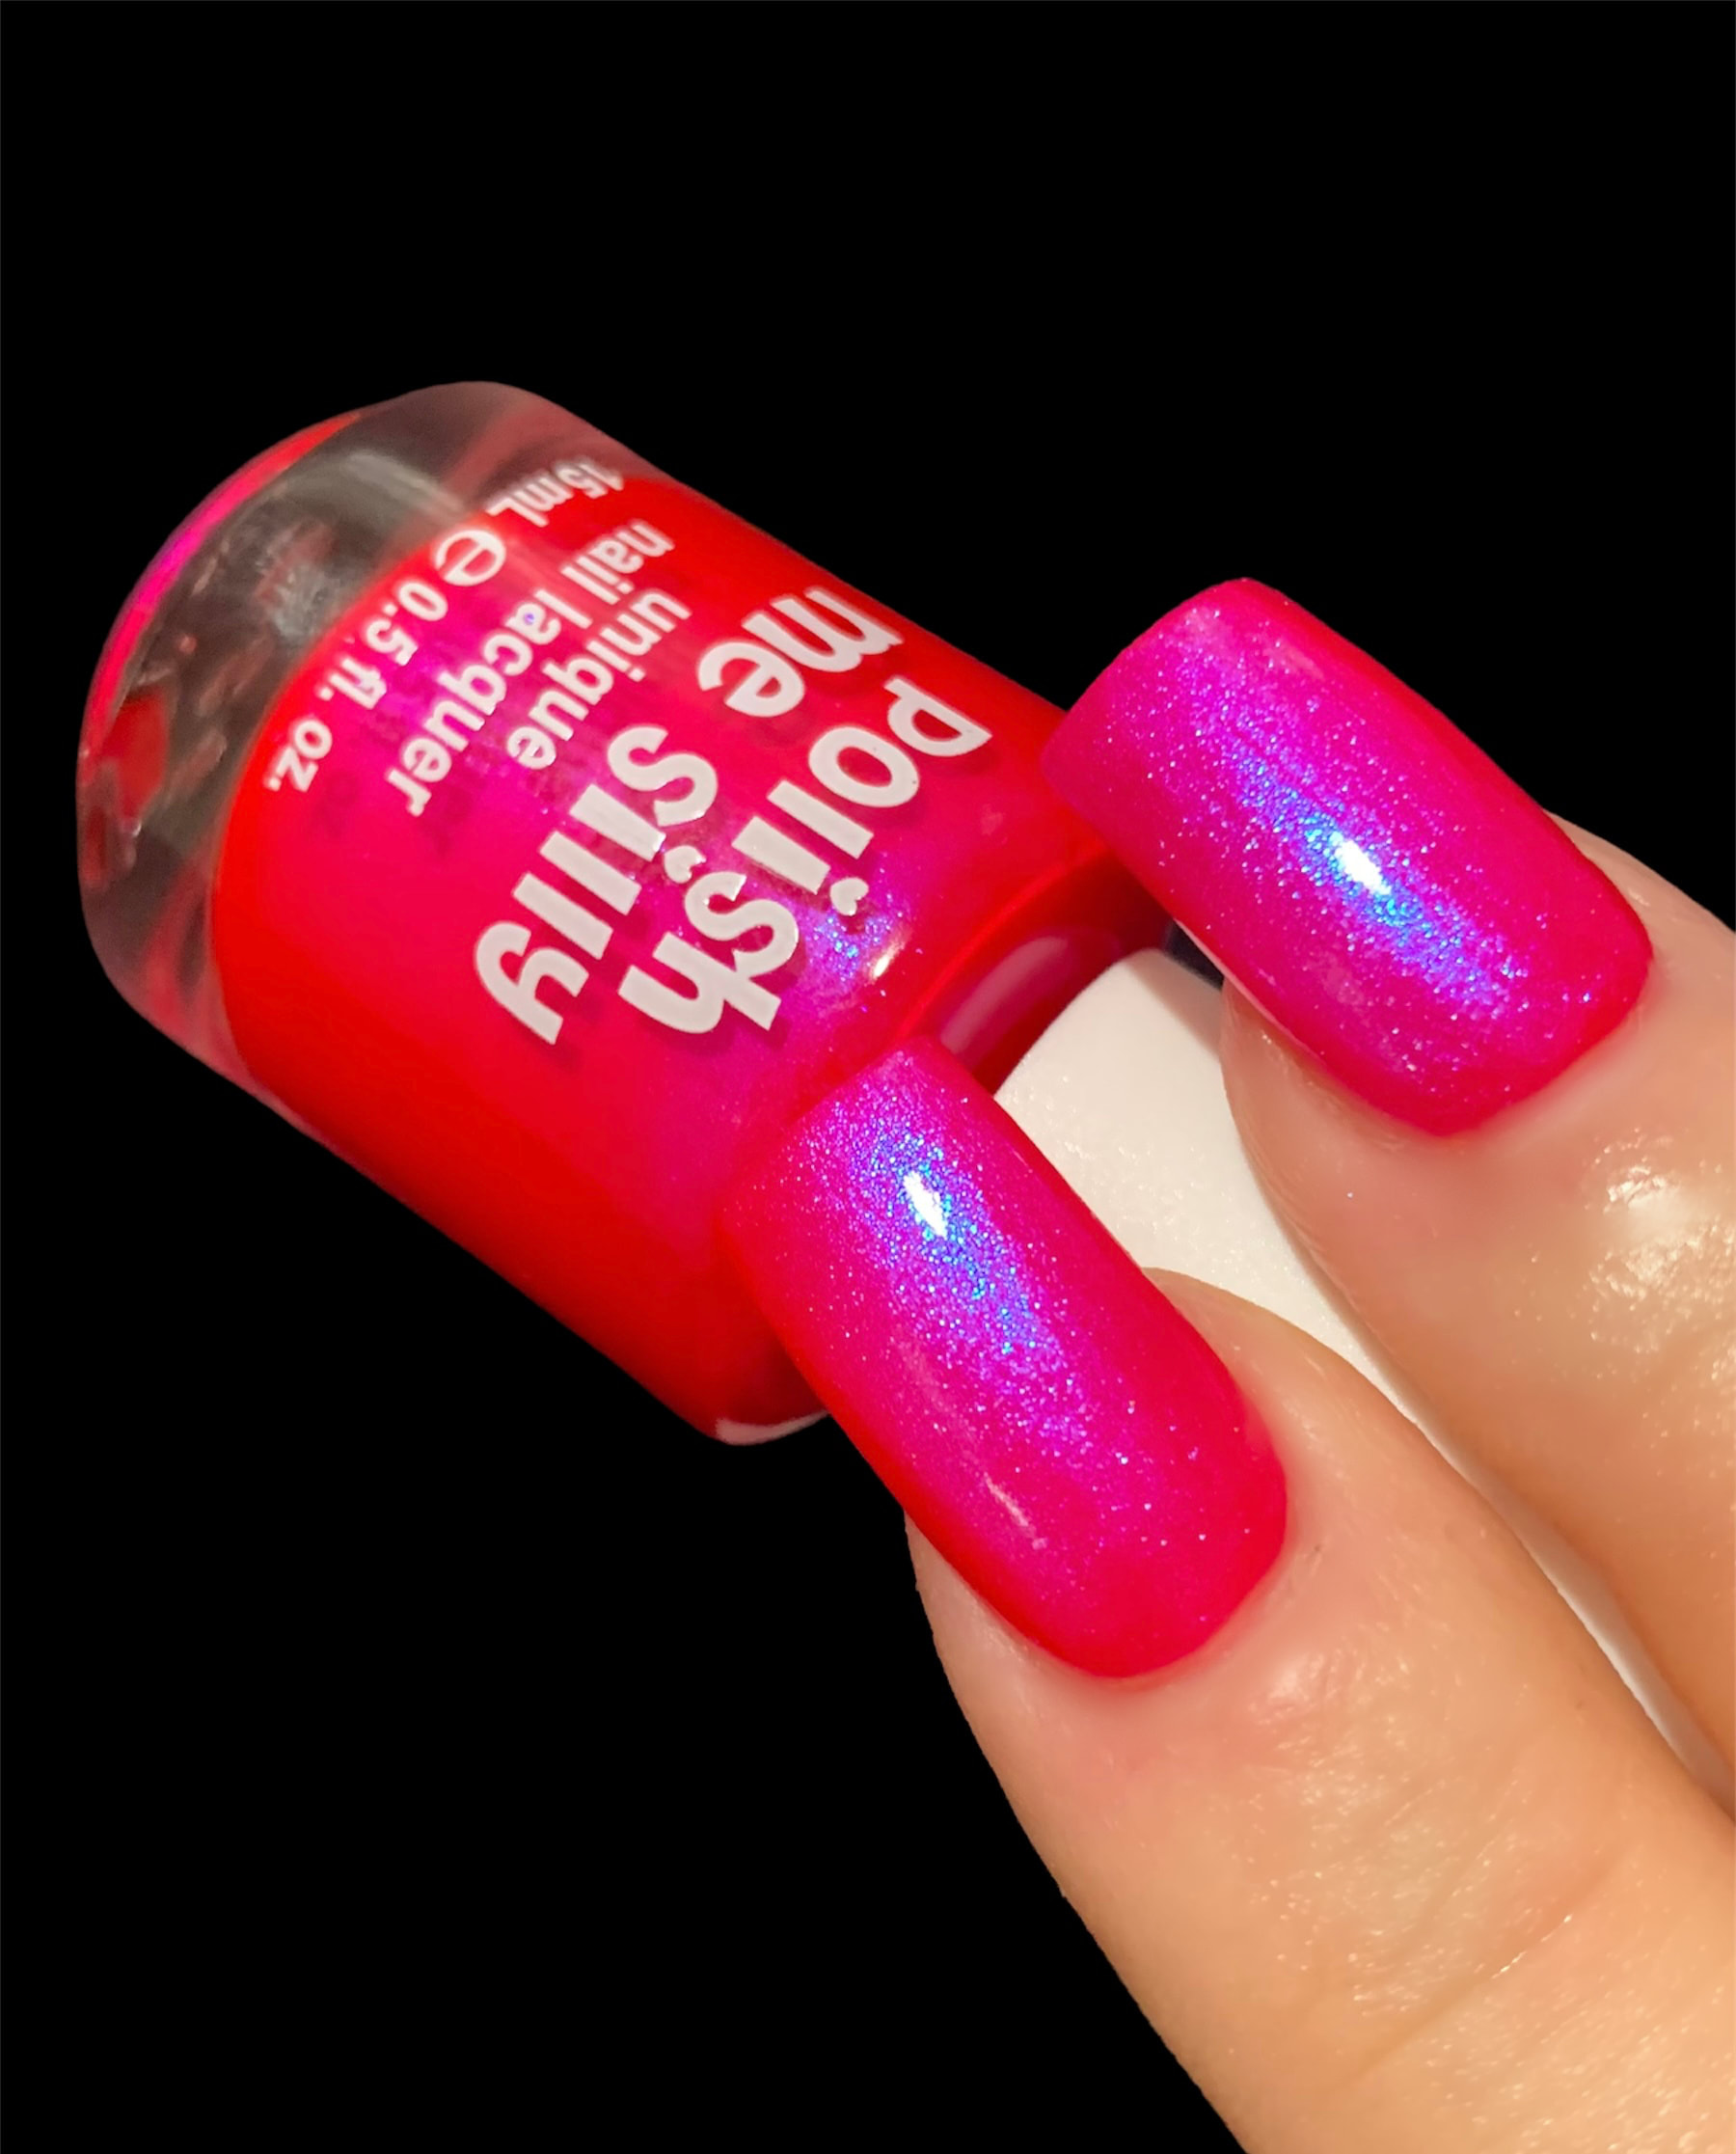 Polish Me Silly Neon Flower Nail Art Stickers